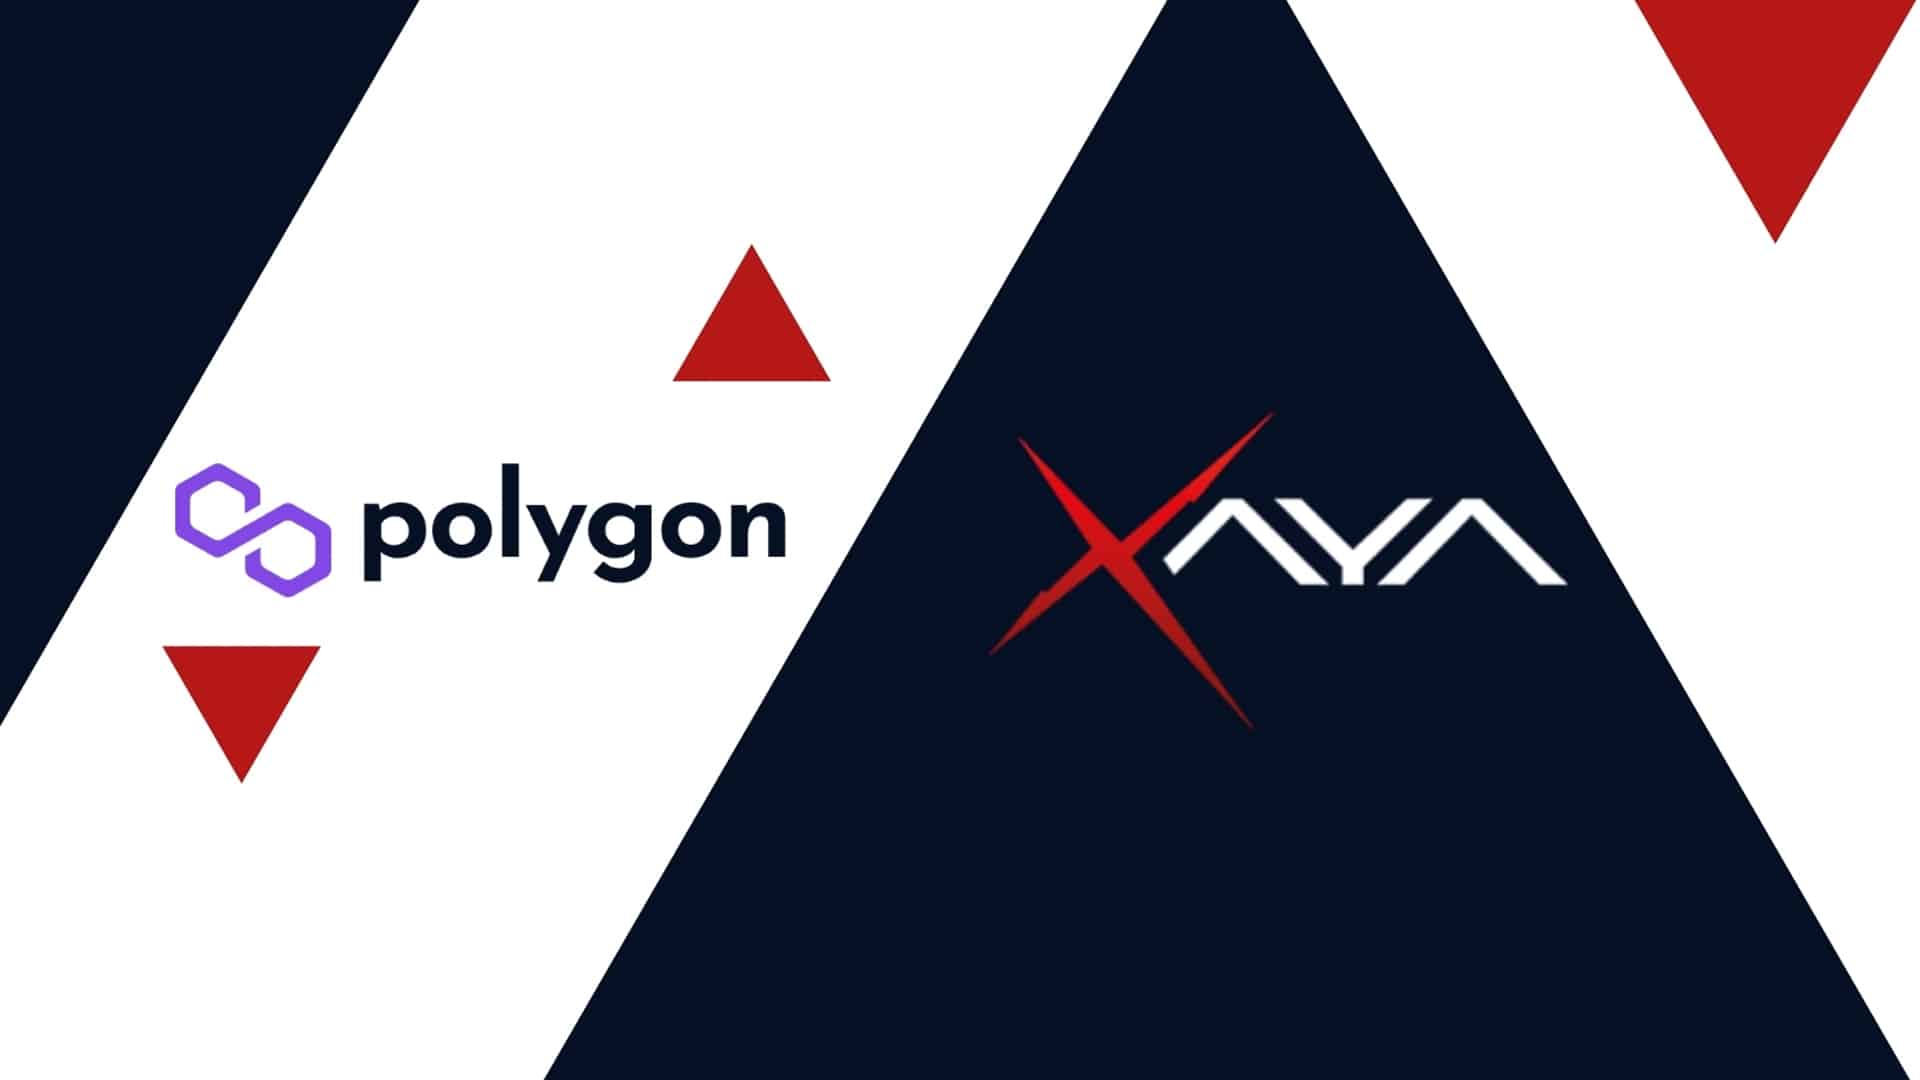 xaya polygon Autonomous Worlds - the parent company of the Xaya blockchain gaming platform - and Polygon (previously known as Matic) have struck a partnership to bring Xaya’s decentralized games on the Polygon’s Ethereum sidechain.